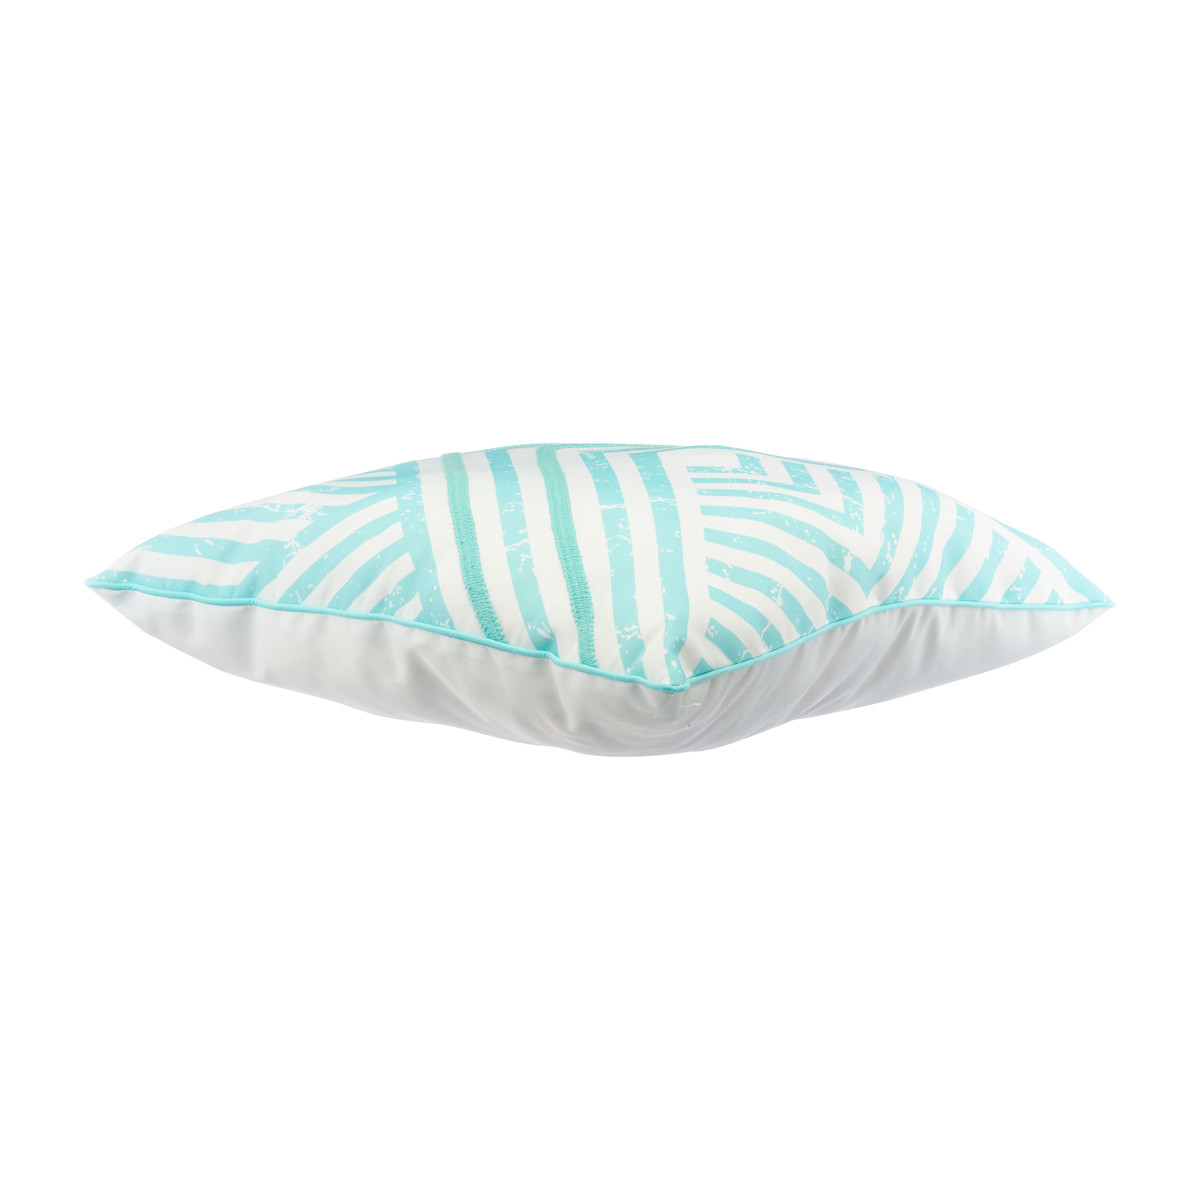 Decorative Line Printed Square Pillow, 18 in x 18 in